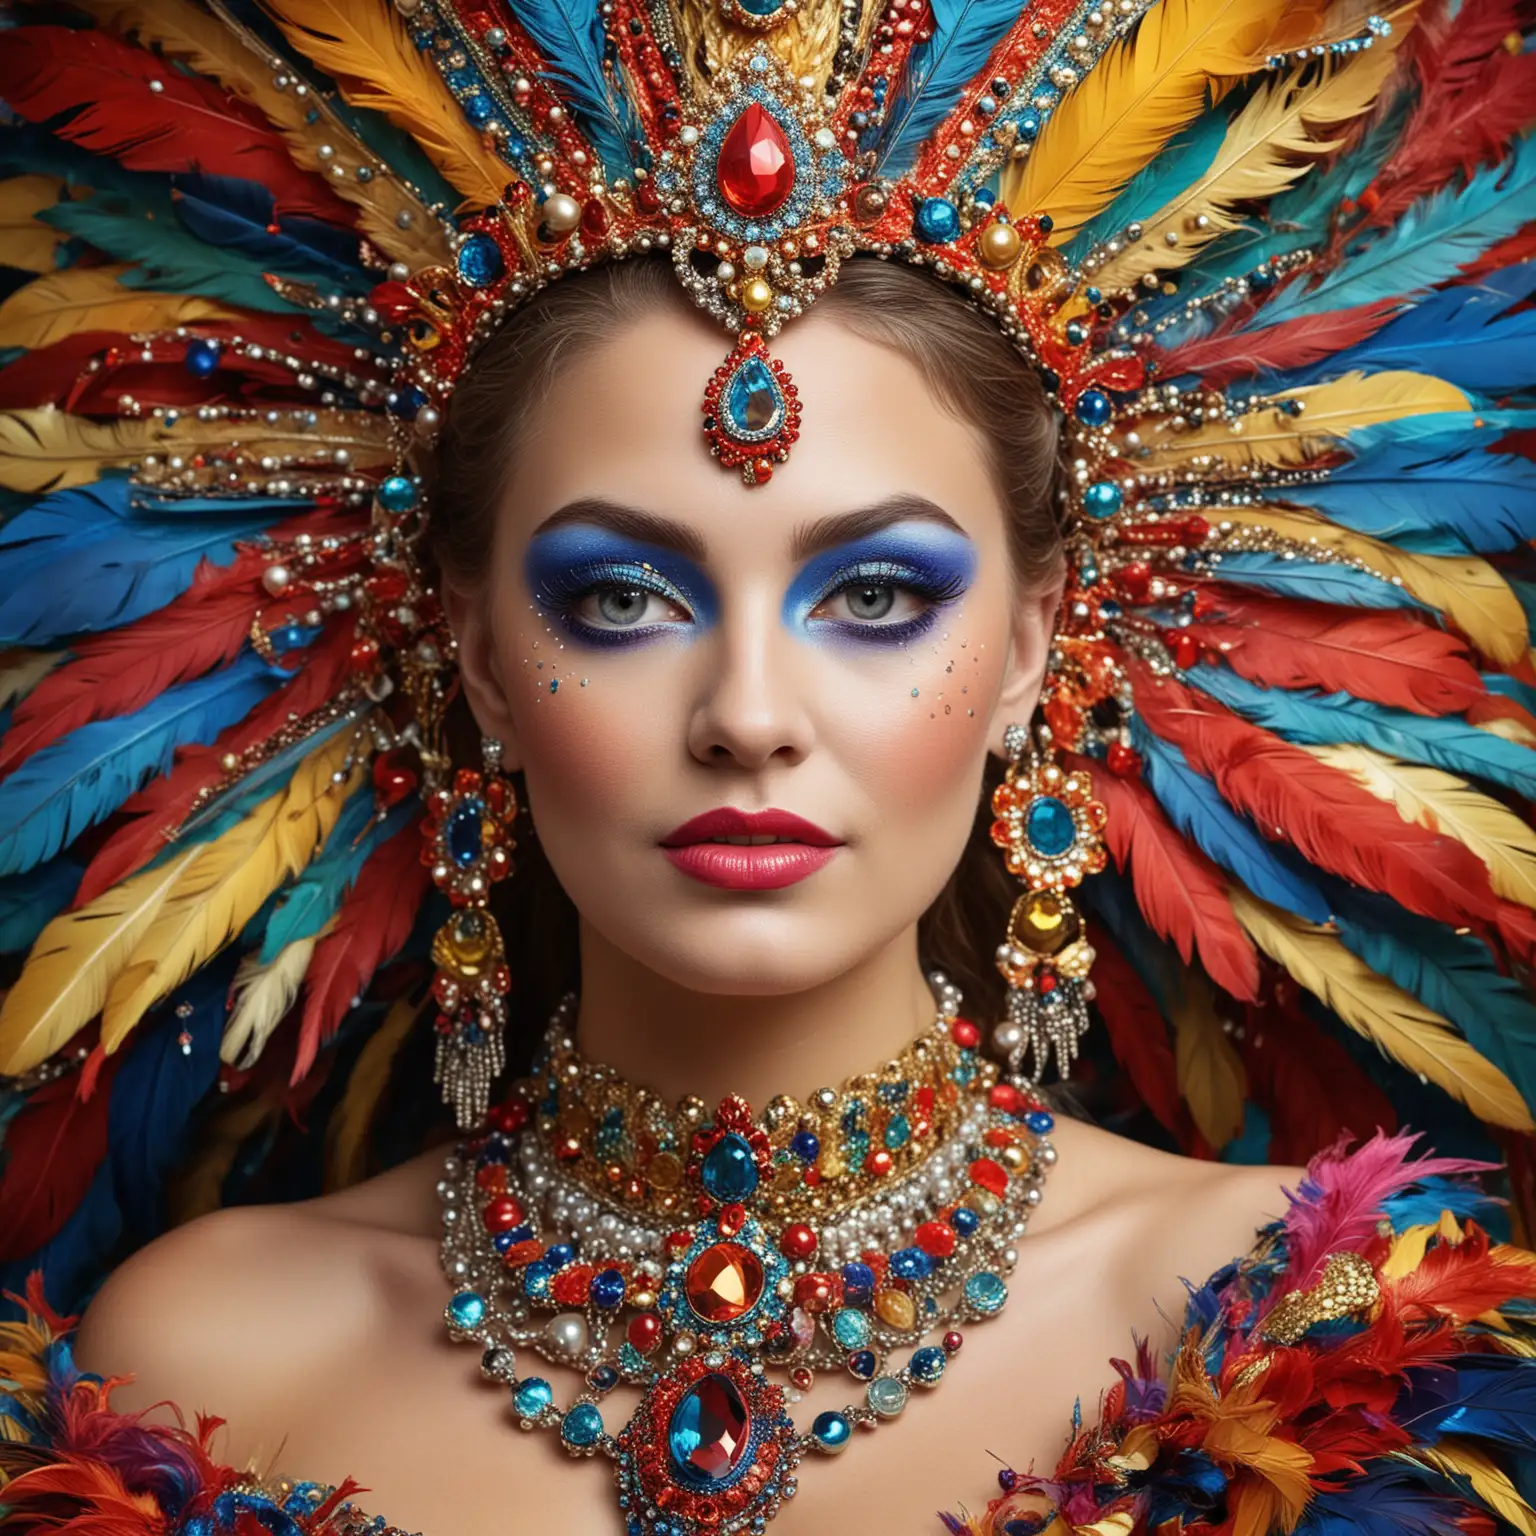 Carnival Queen Portrait Colorful Makeup and Festive Jewelry